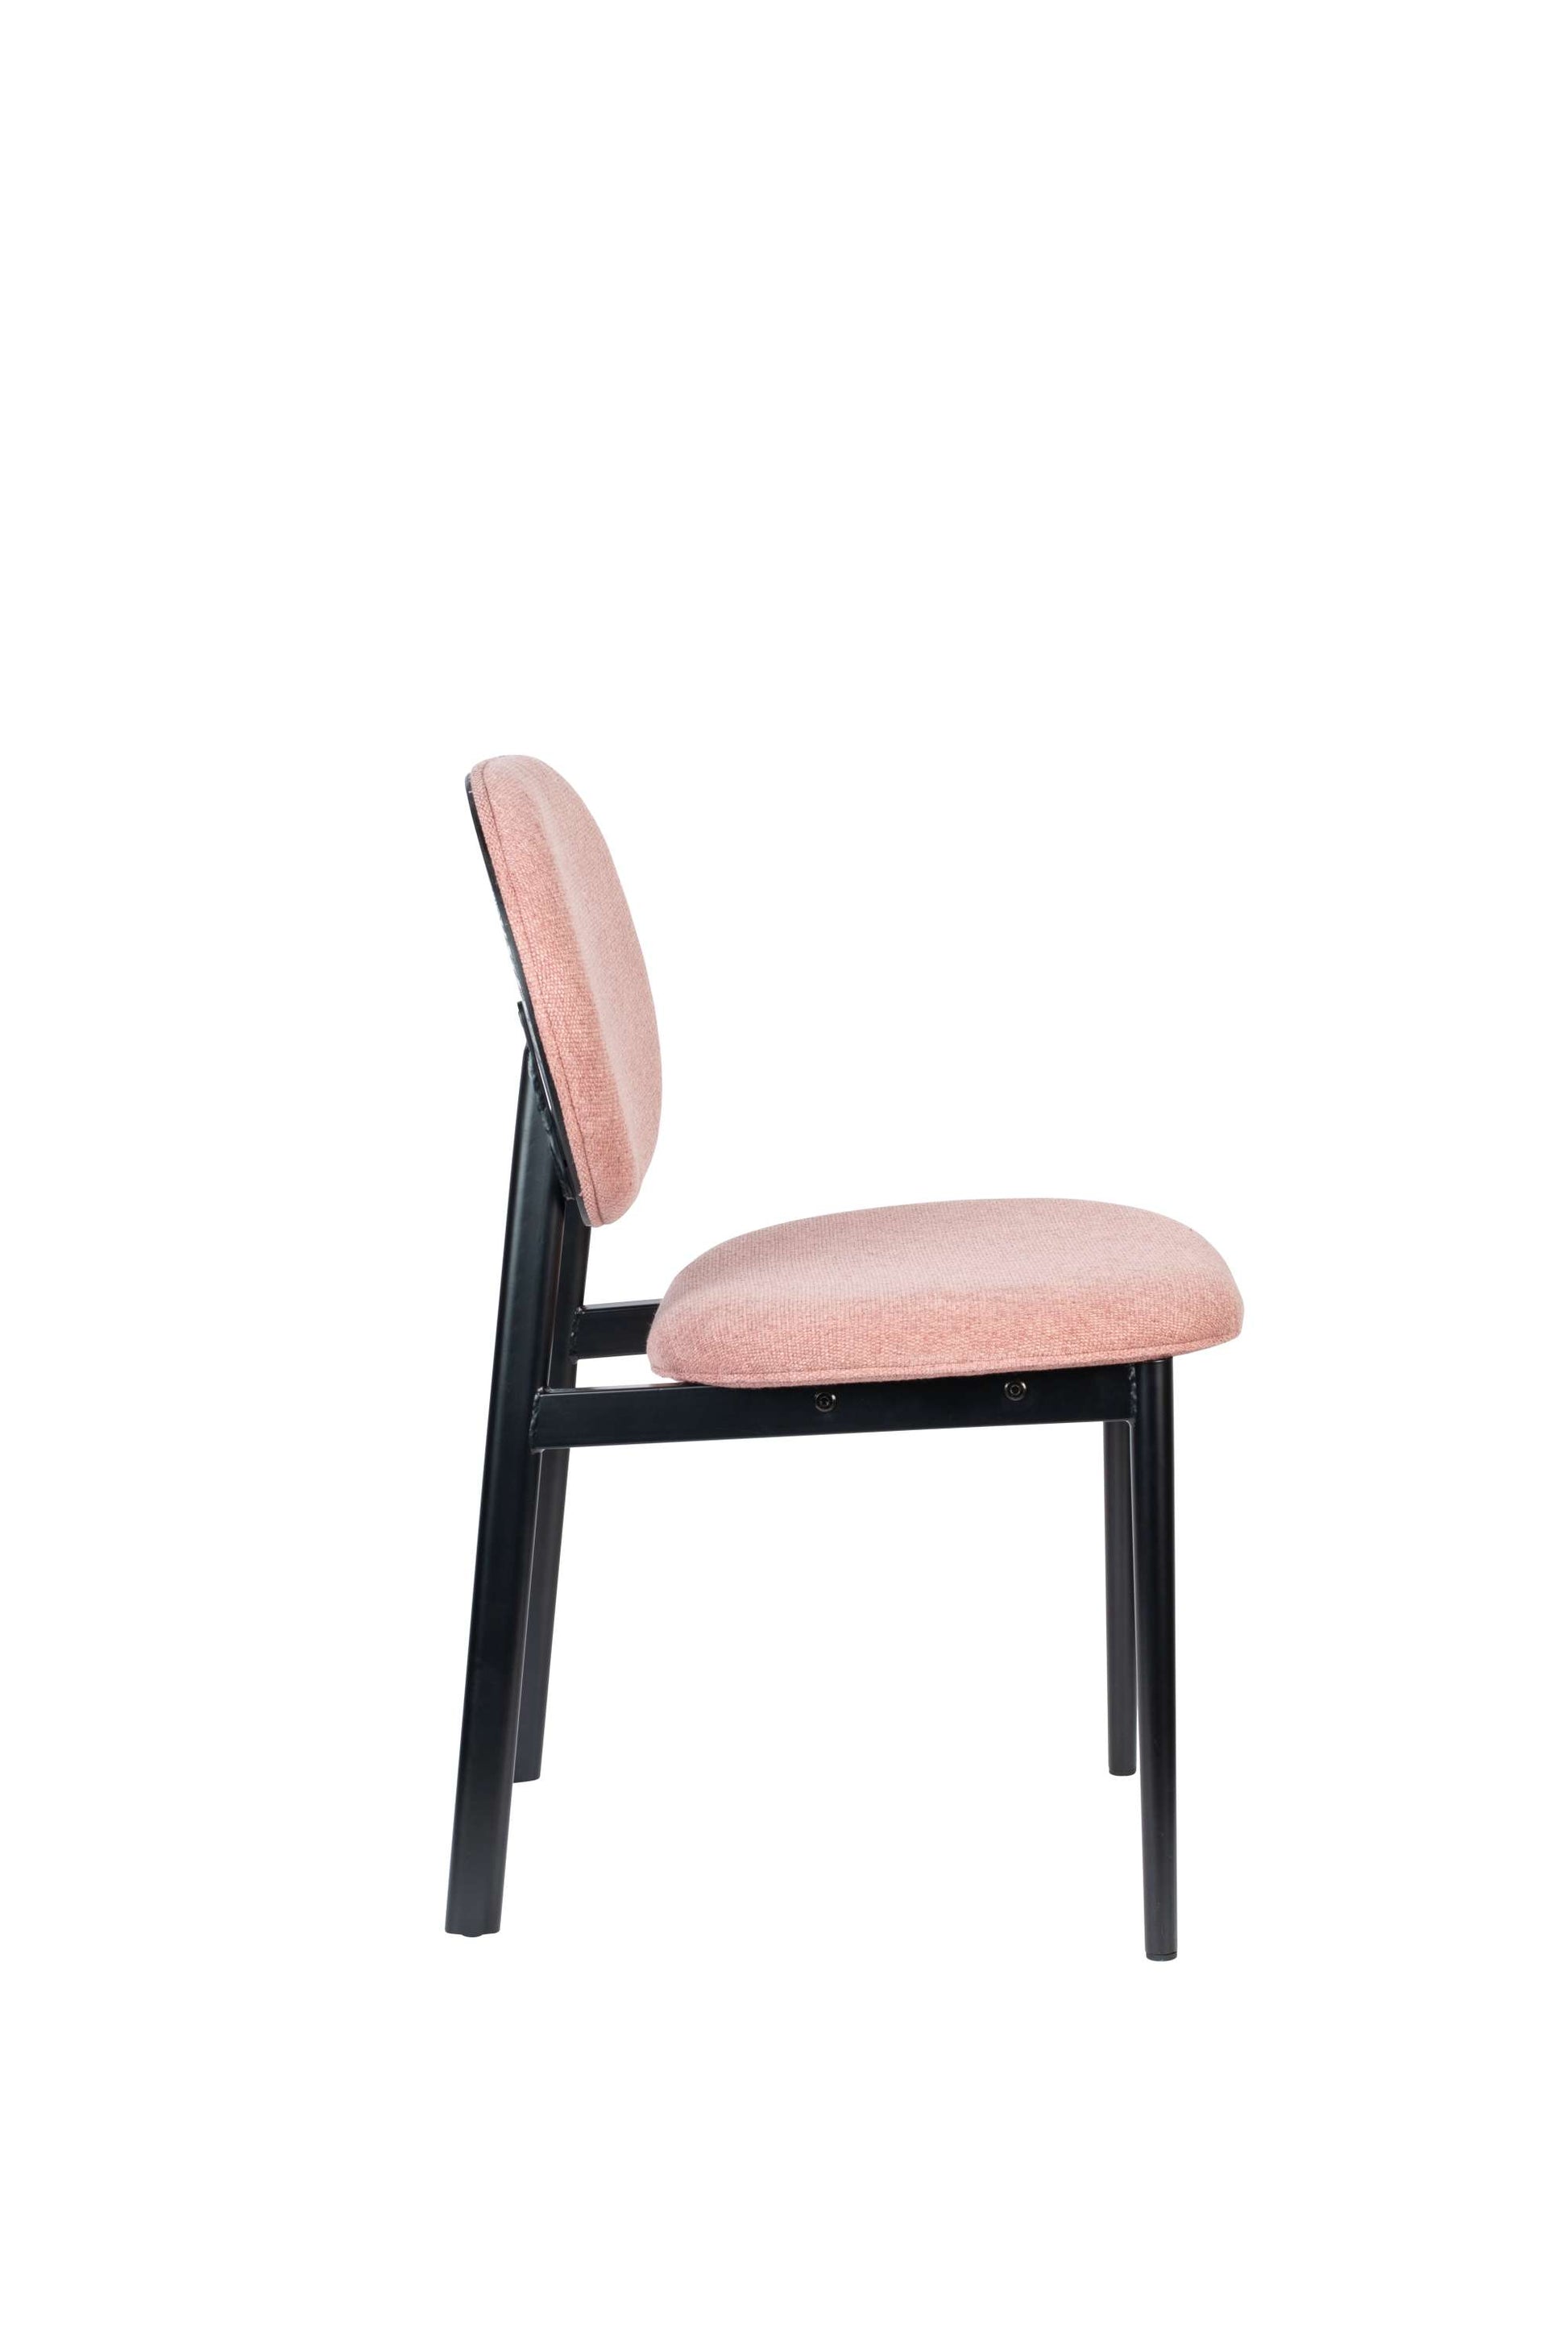 Zuiver | CHAIR SPIKE PINK Default Title